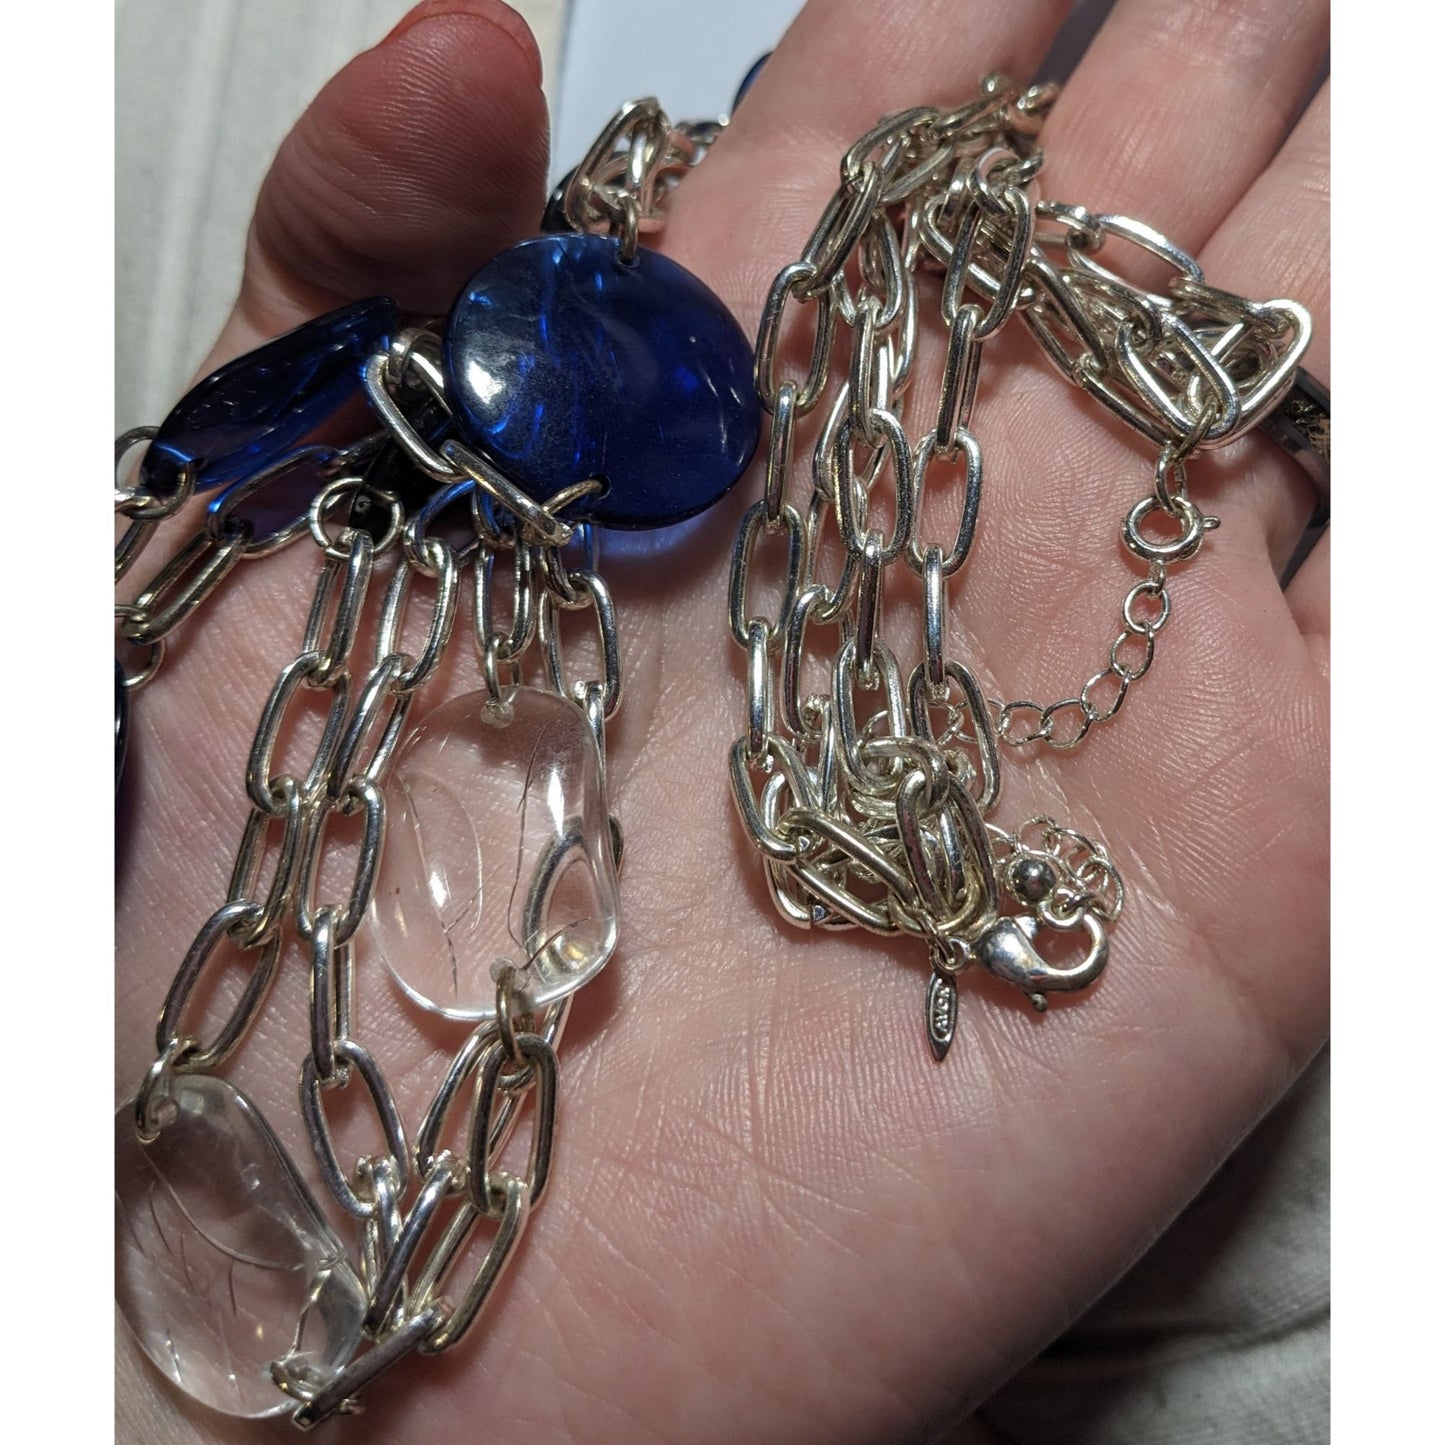 Avon Blue And Silver Chain Necklace